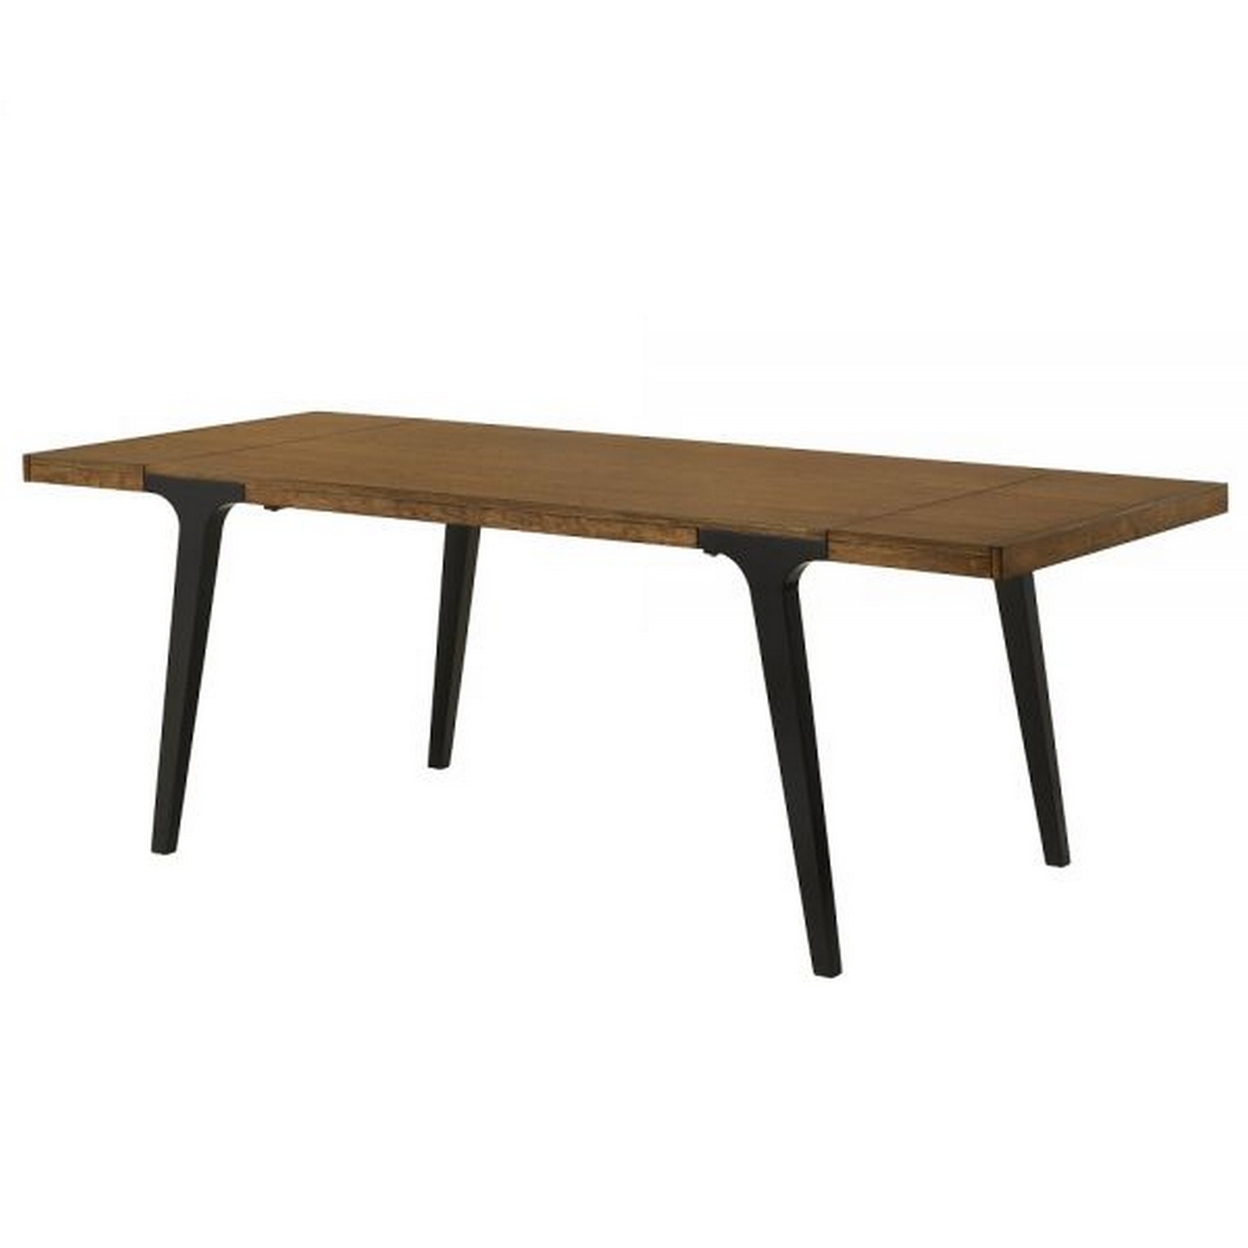 Hilly 59-83 Inch Extendable Dining Table, Rubberwood, Brown And Black - Saltoro Sherpi